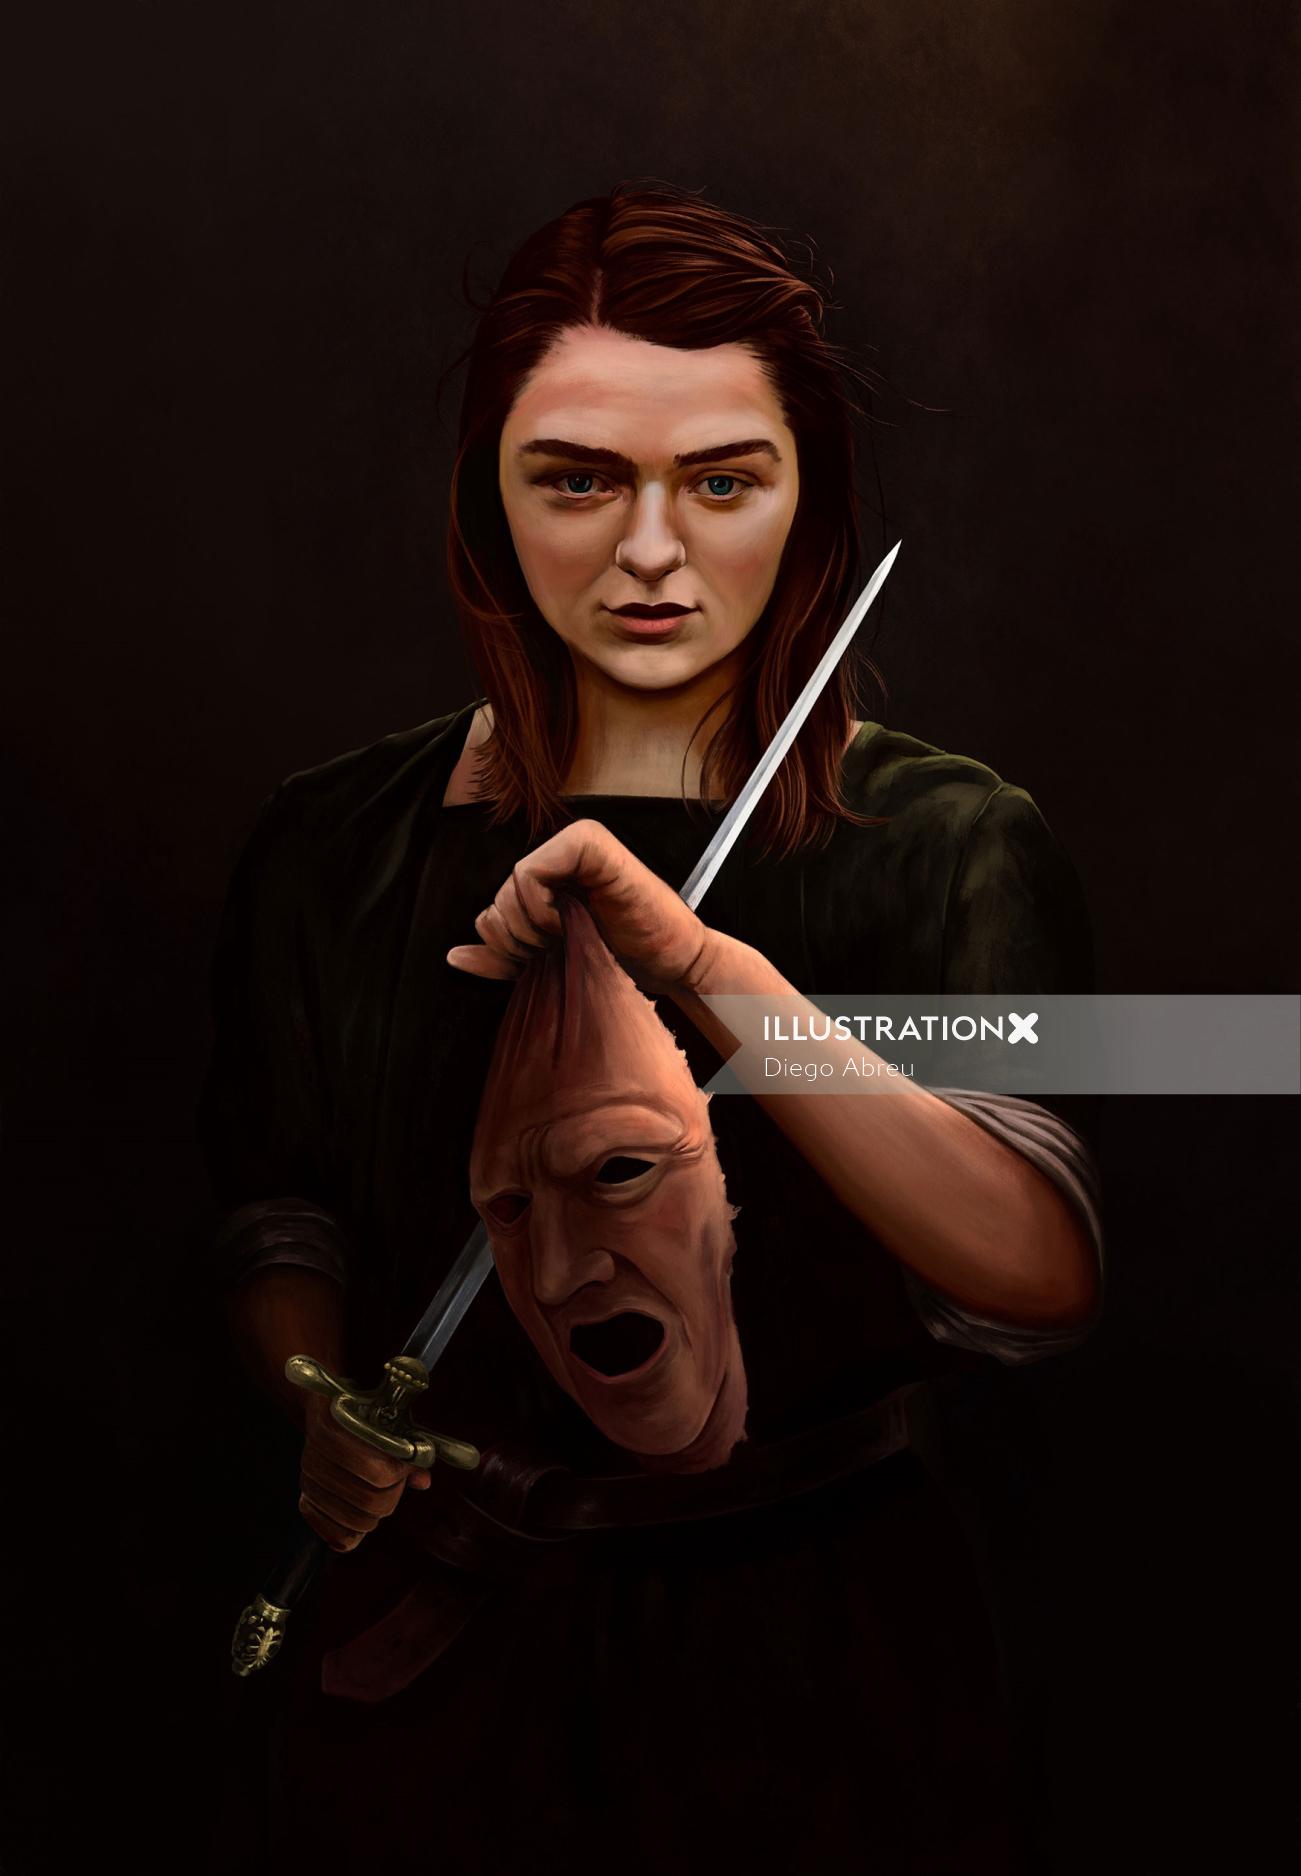 Arya Stark with Walder Frey's face painting